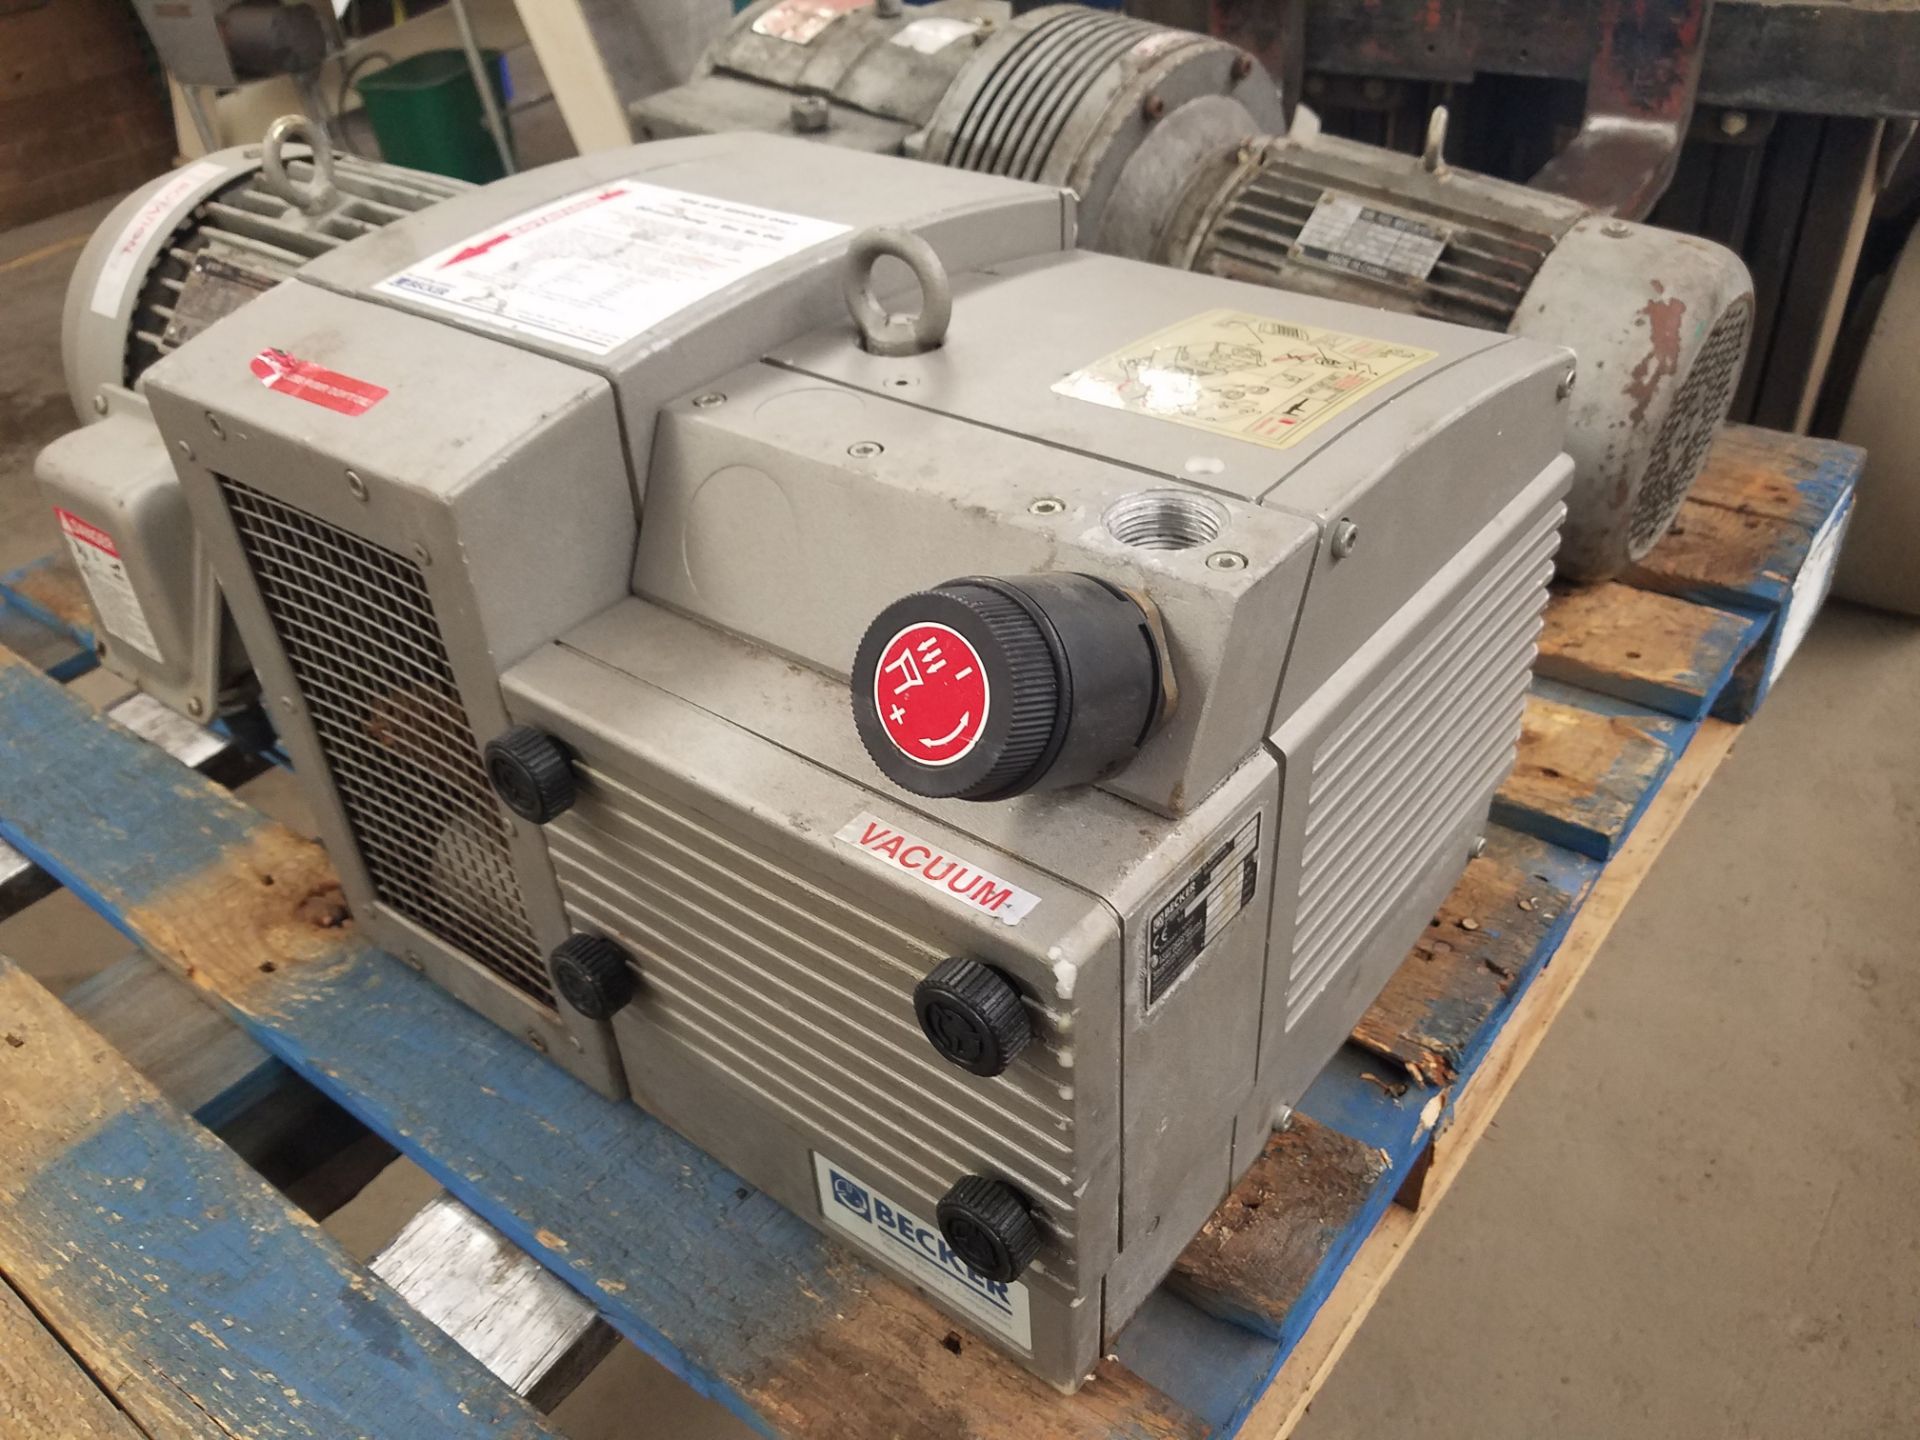 Becker KVT 3.80 Vacuum Pump, 5 hp, Volt 230/360, 3-Phase (Loading Fee $100) (Located Fort Worth, TX - Image 2 of 5